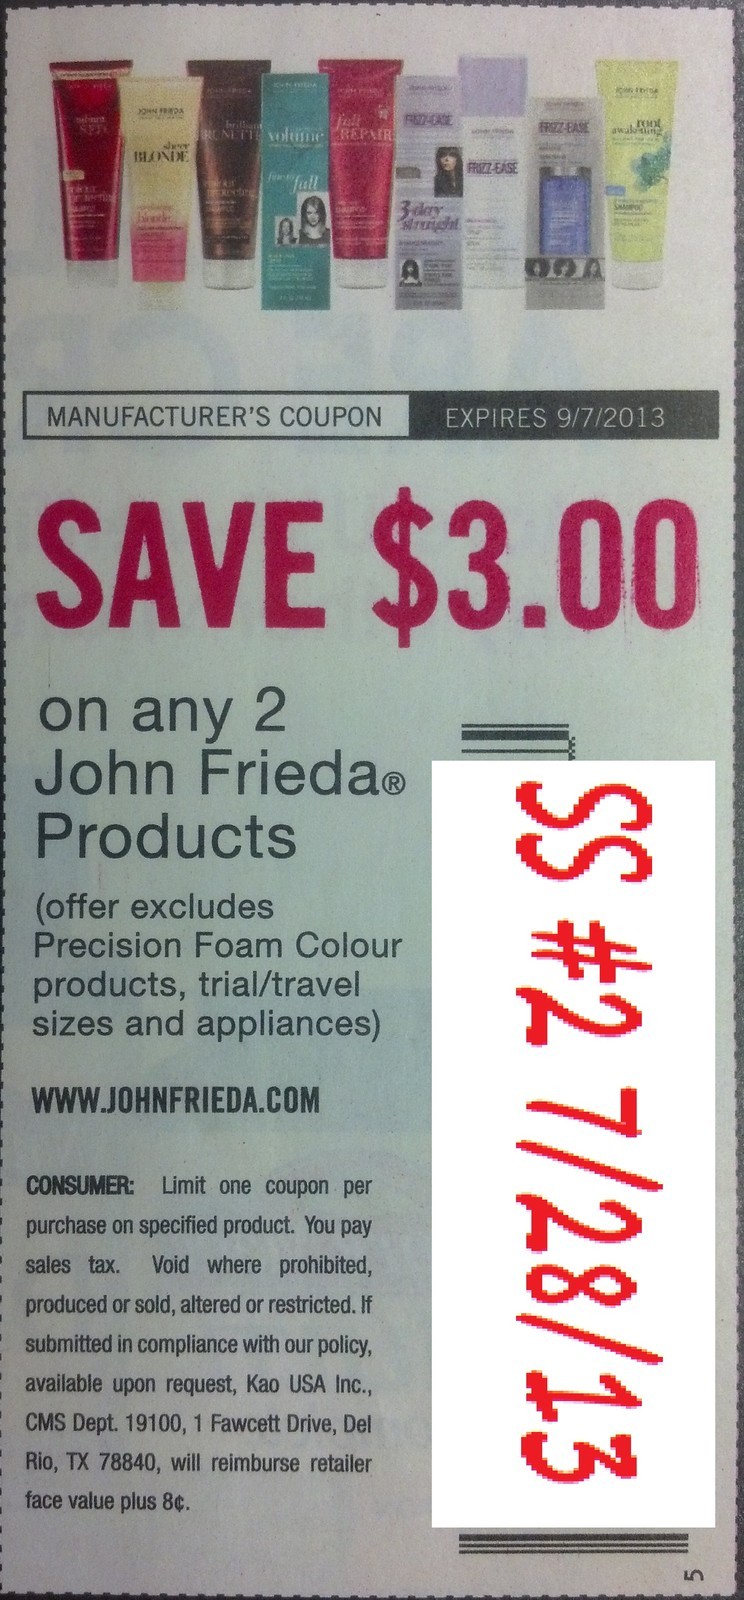 Save $3.00 on any 2 John Frieda Products (Excludes Precision foam colour products, trial/travel sizes and appliances) Expires 09/07/2013